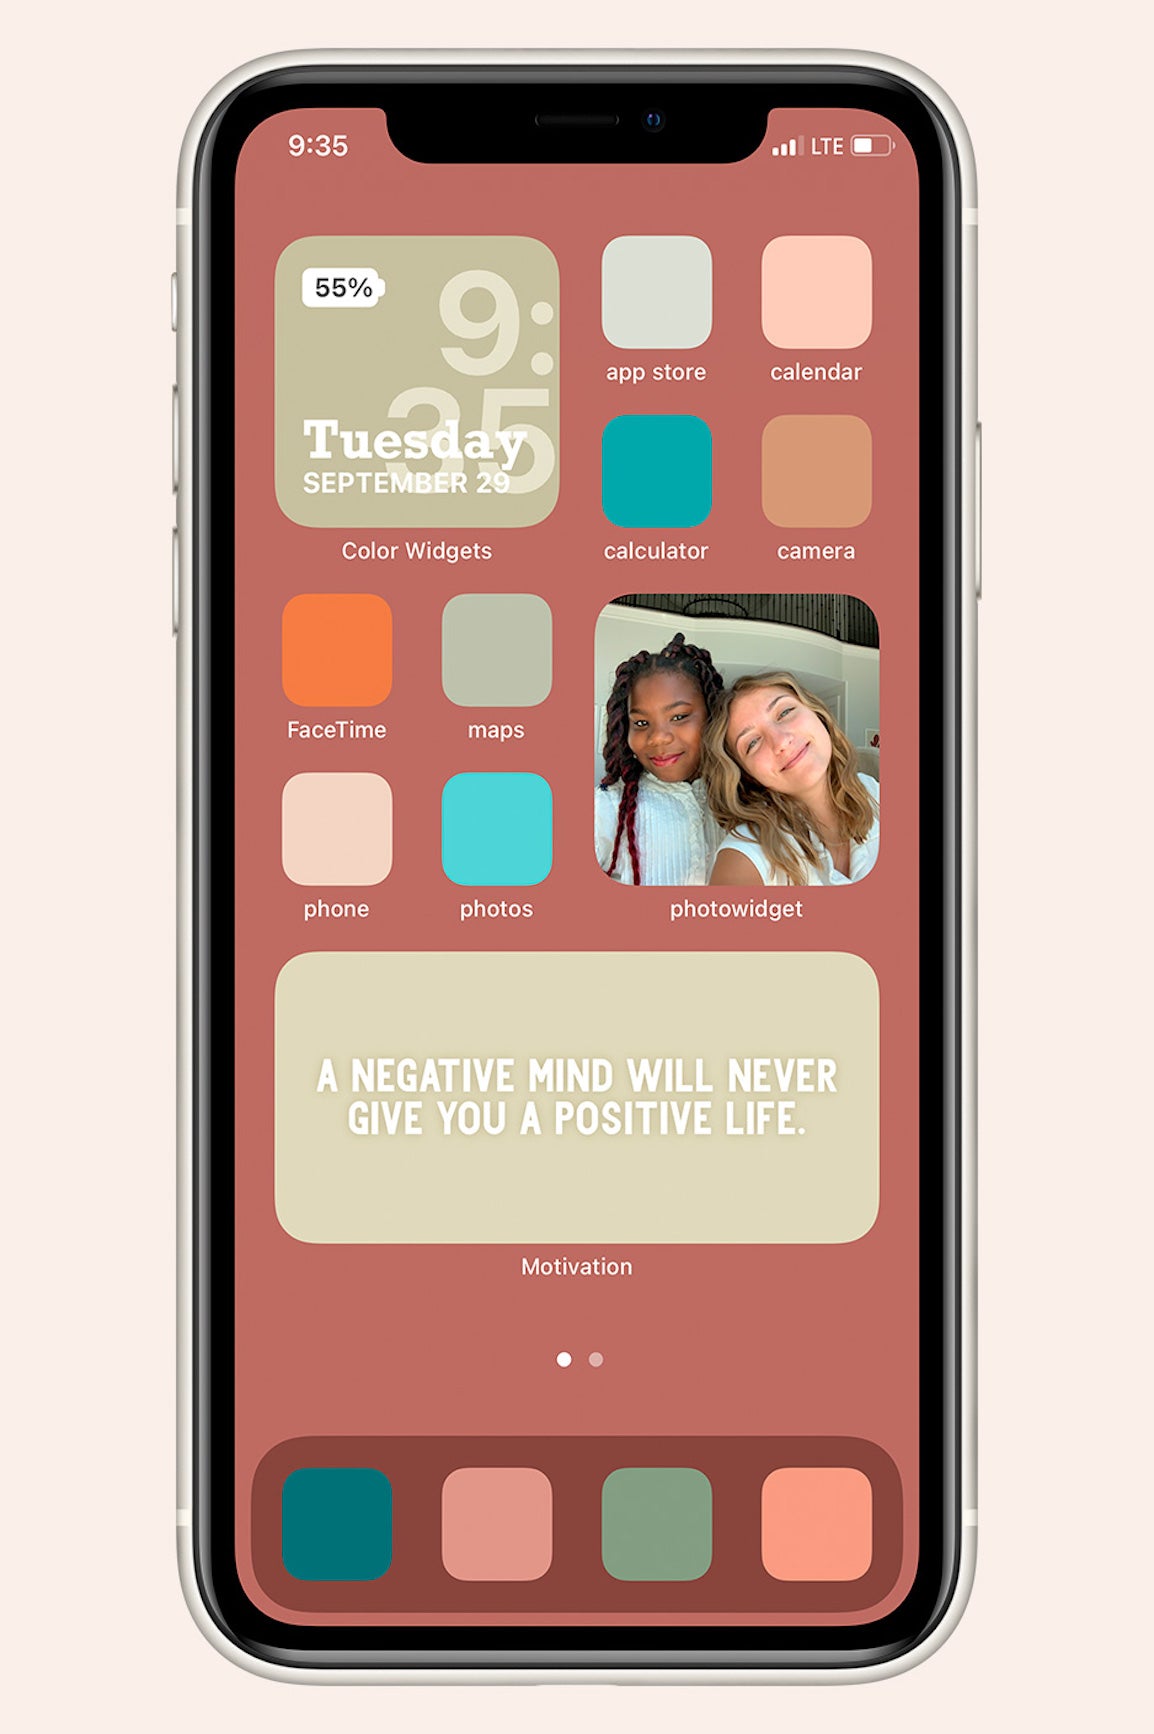 red-ish background with colored bright and pastel toned squares as the app icons